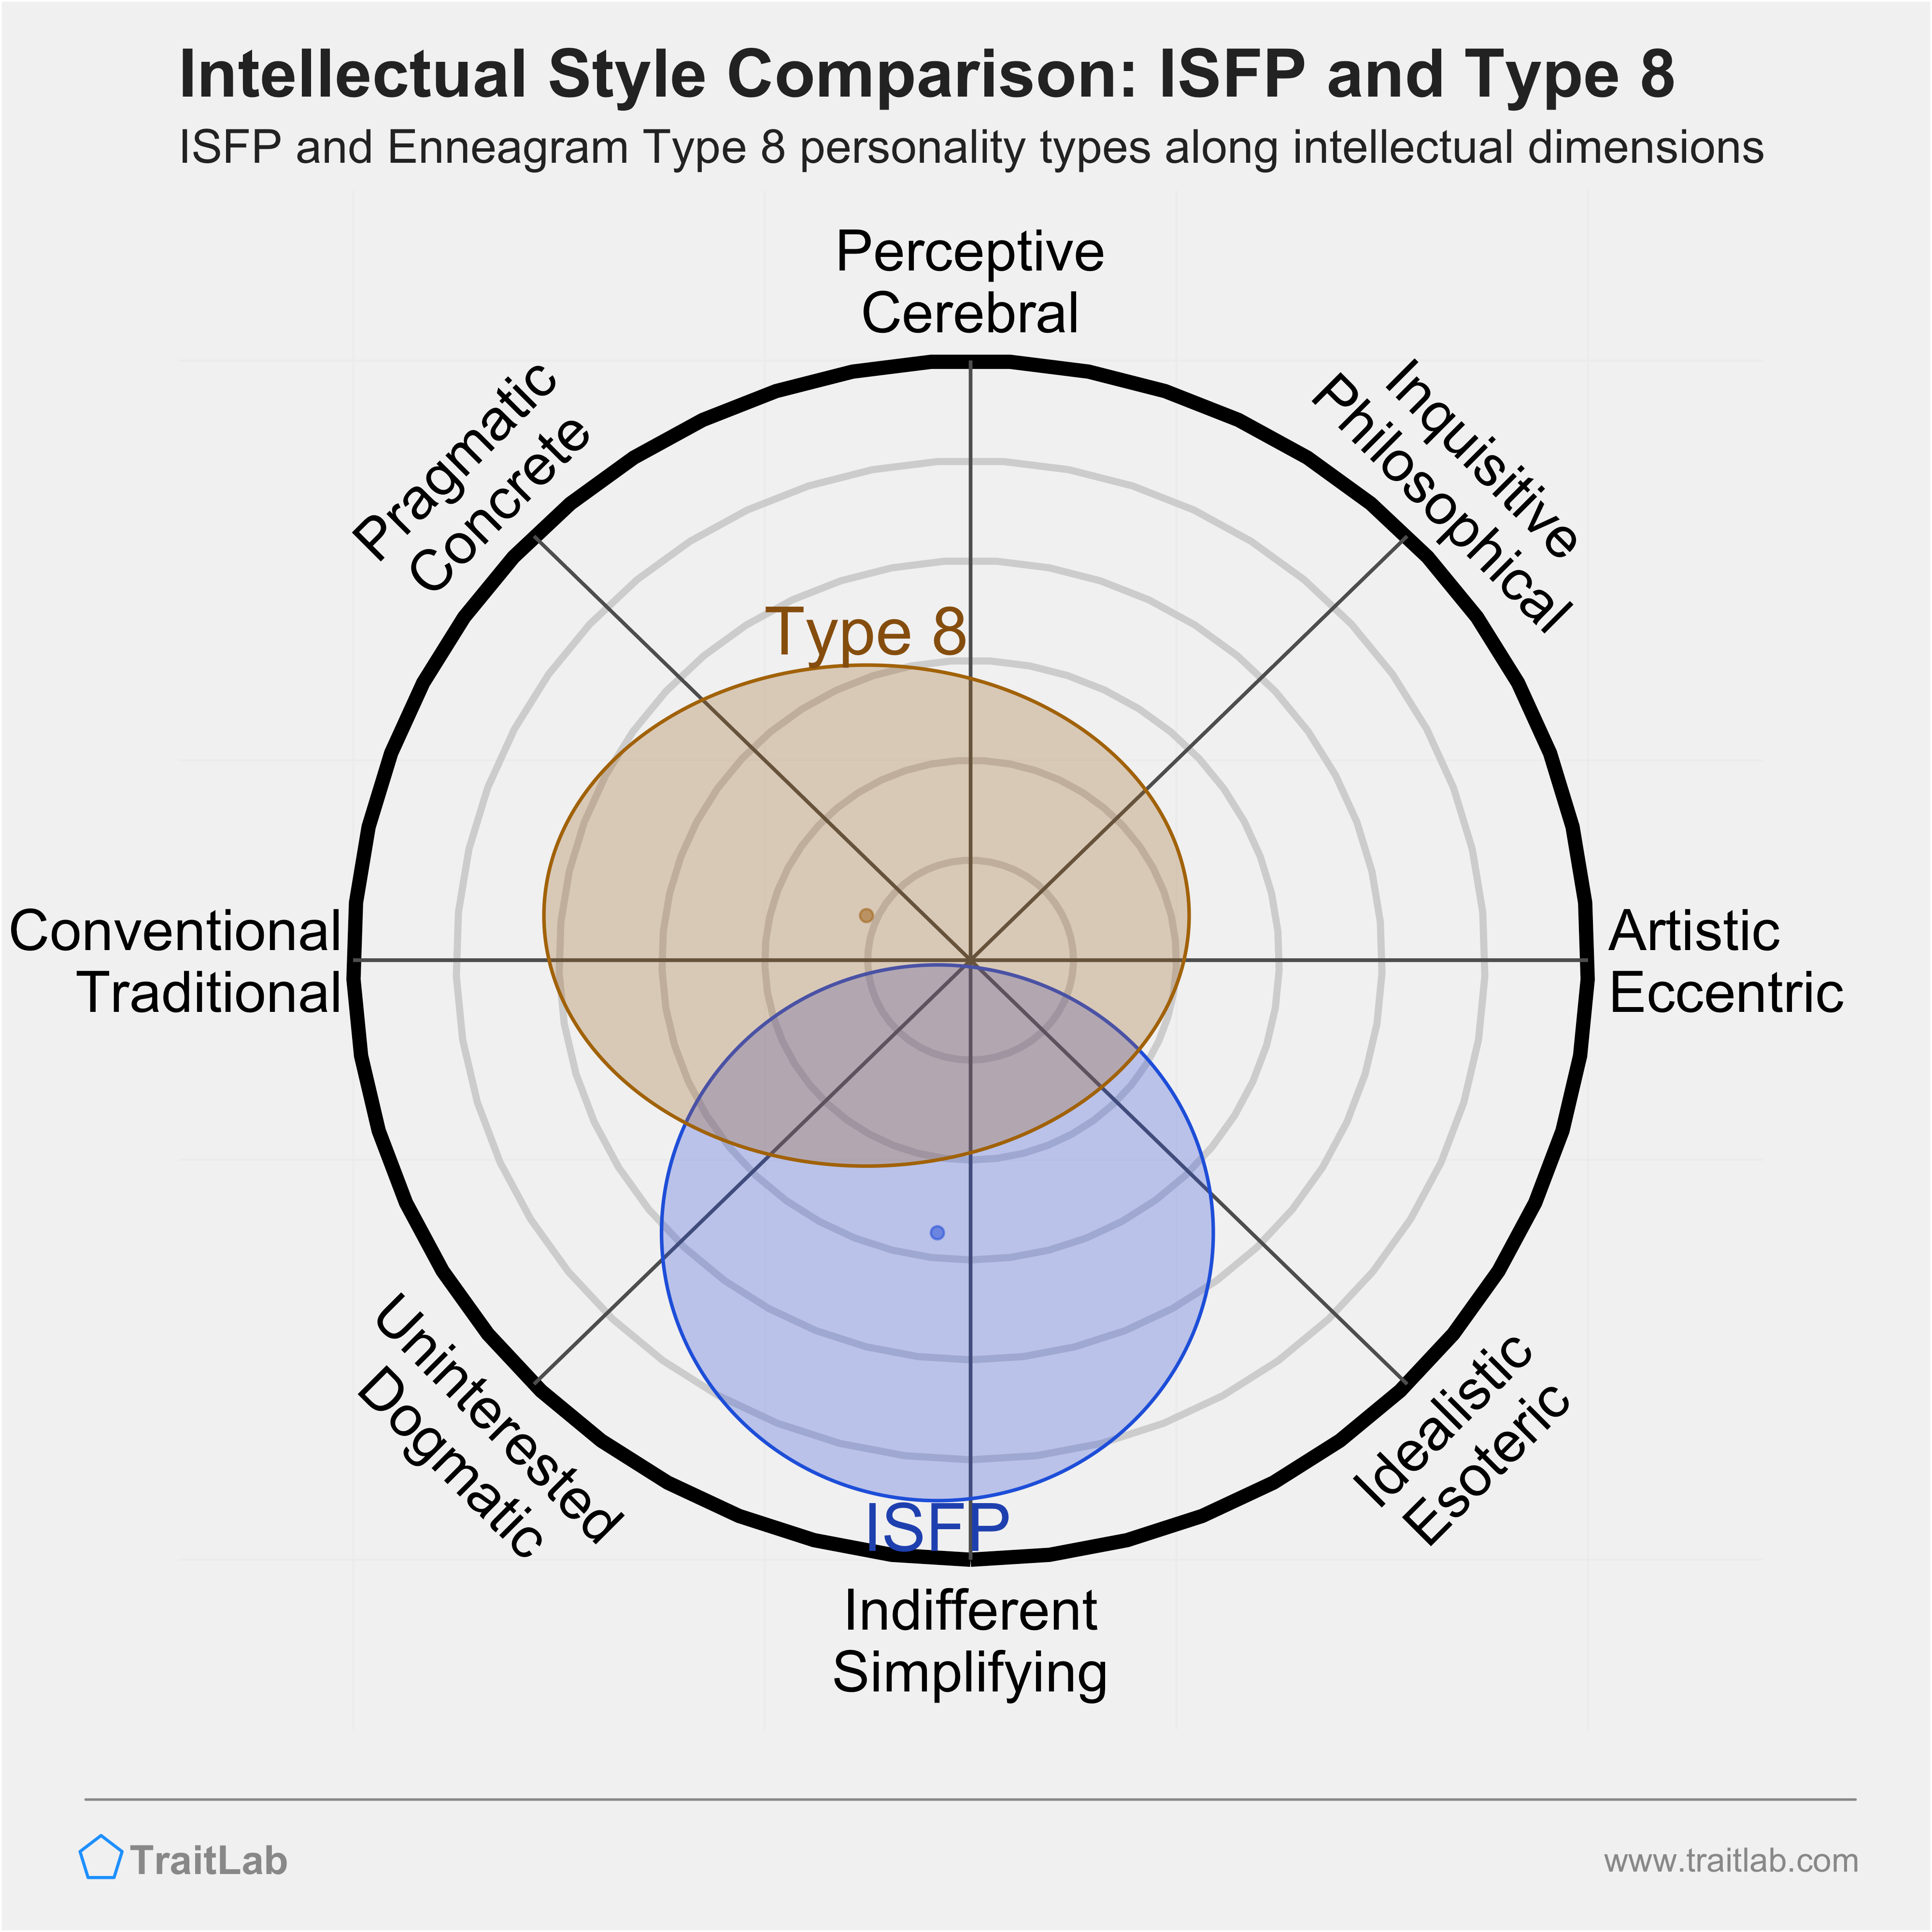 ISFP and Type 8 comparison across intellectual dimensions